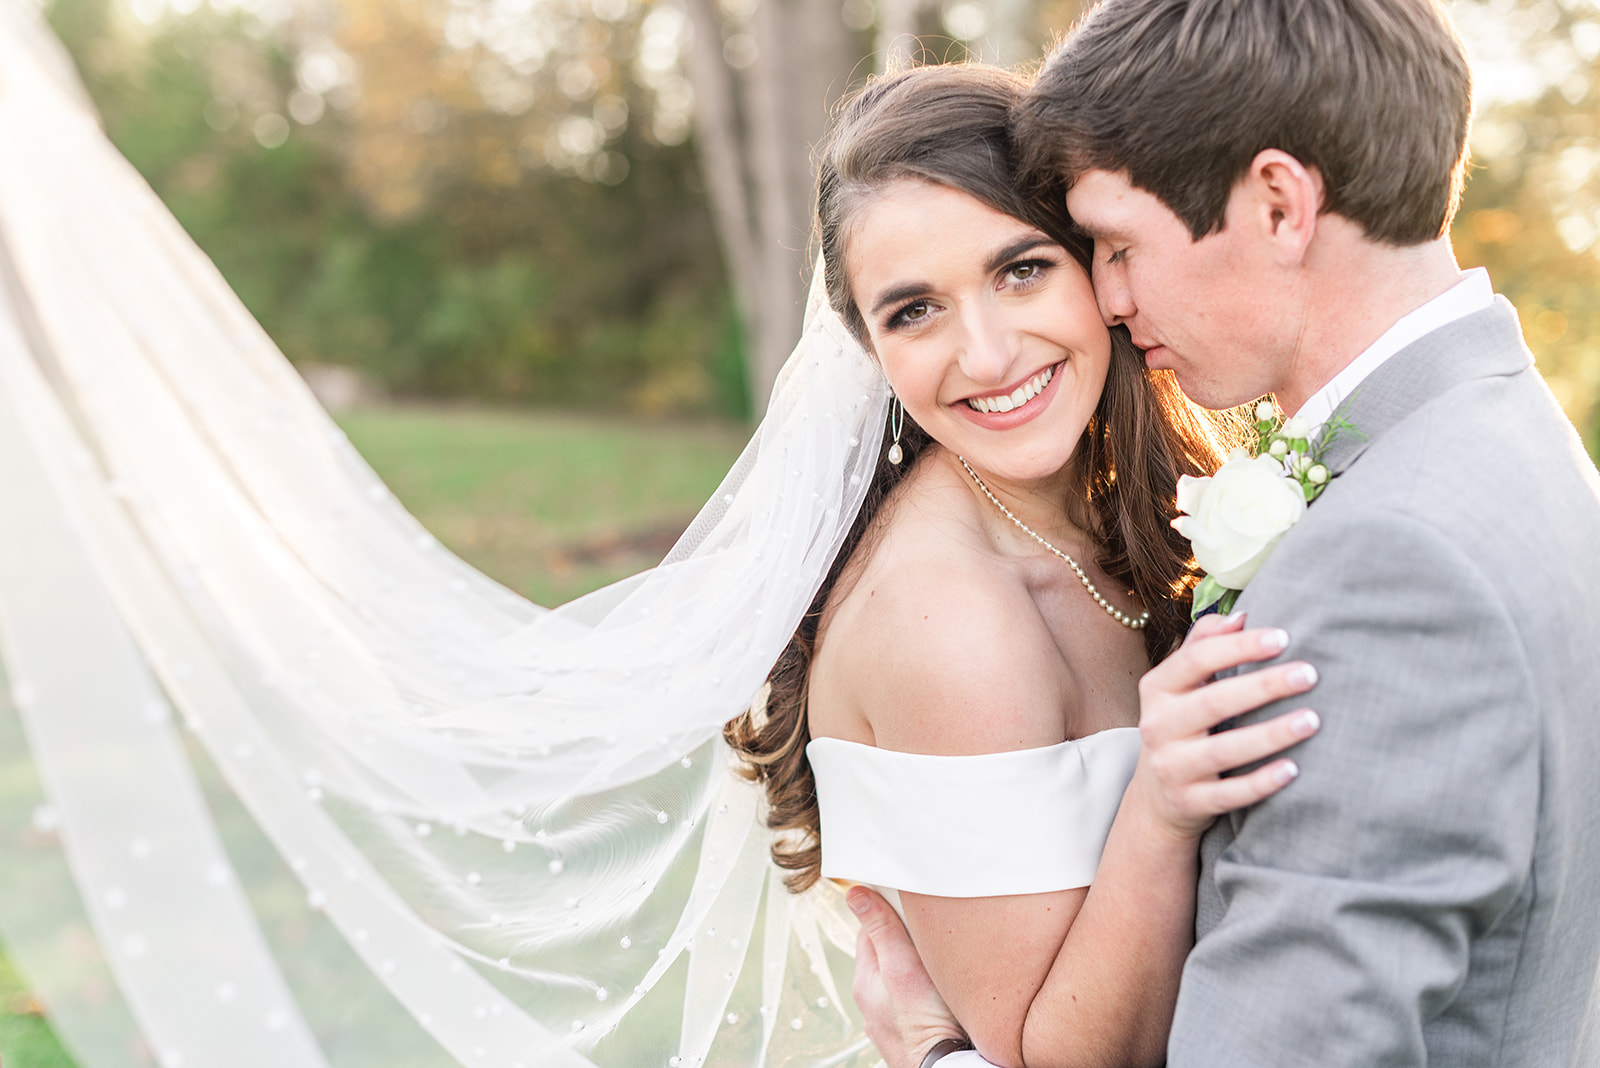 Wedding Updo Inspiration: Brittany Jayde Photography featured on Nashville Bride Guide